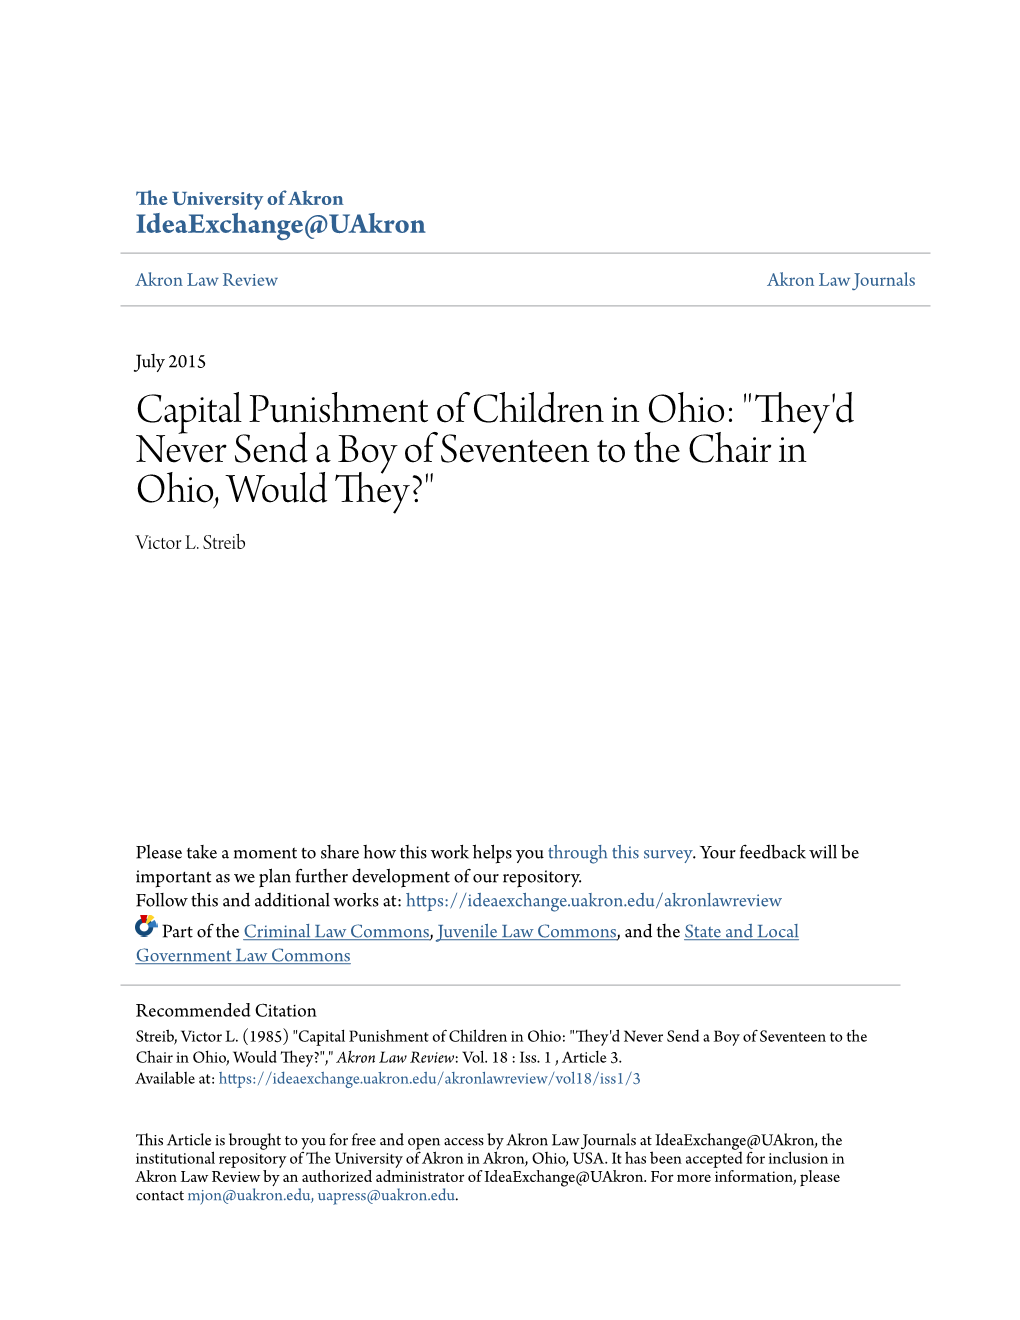 Capital Punishment of Children in Ohio: "They'd Never Send a Boy of Seventeen to the Chair in Ohio, Would They?" Victor L